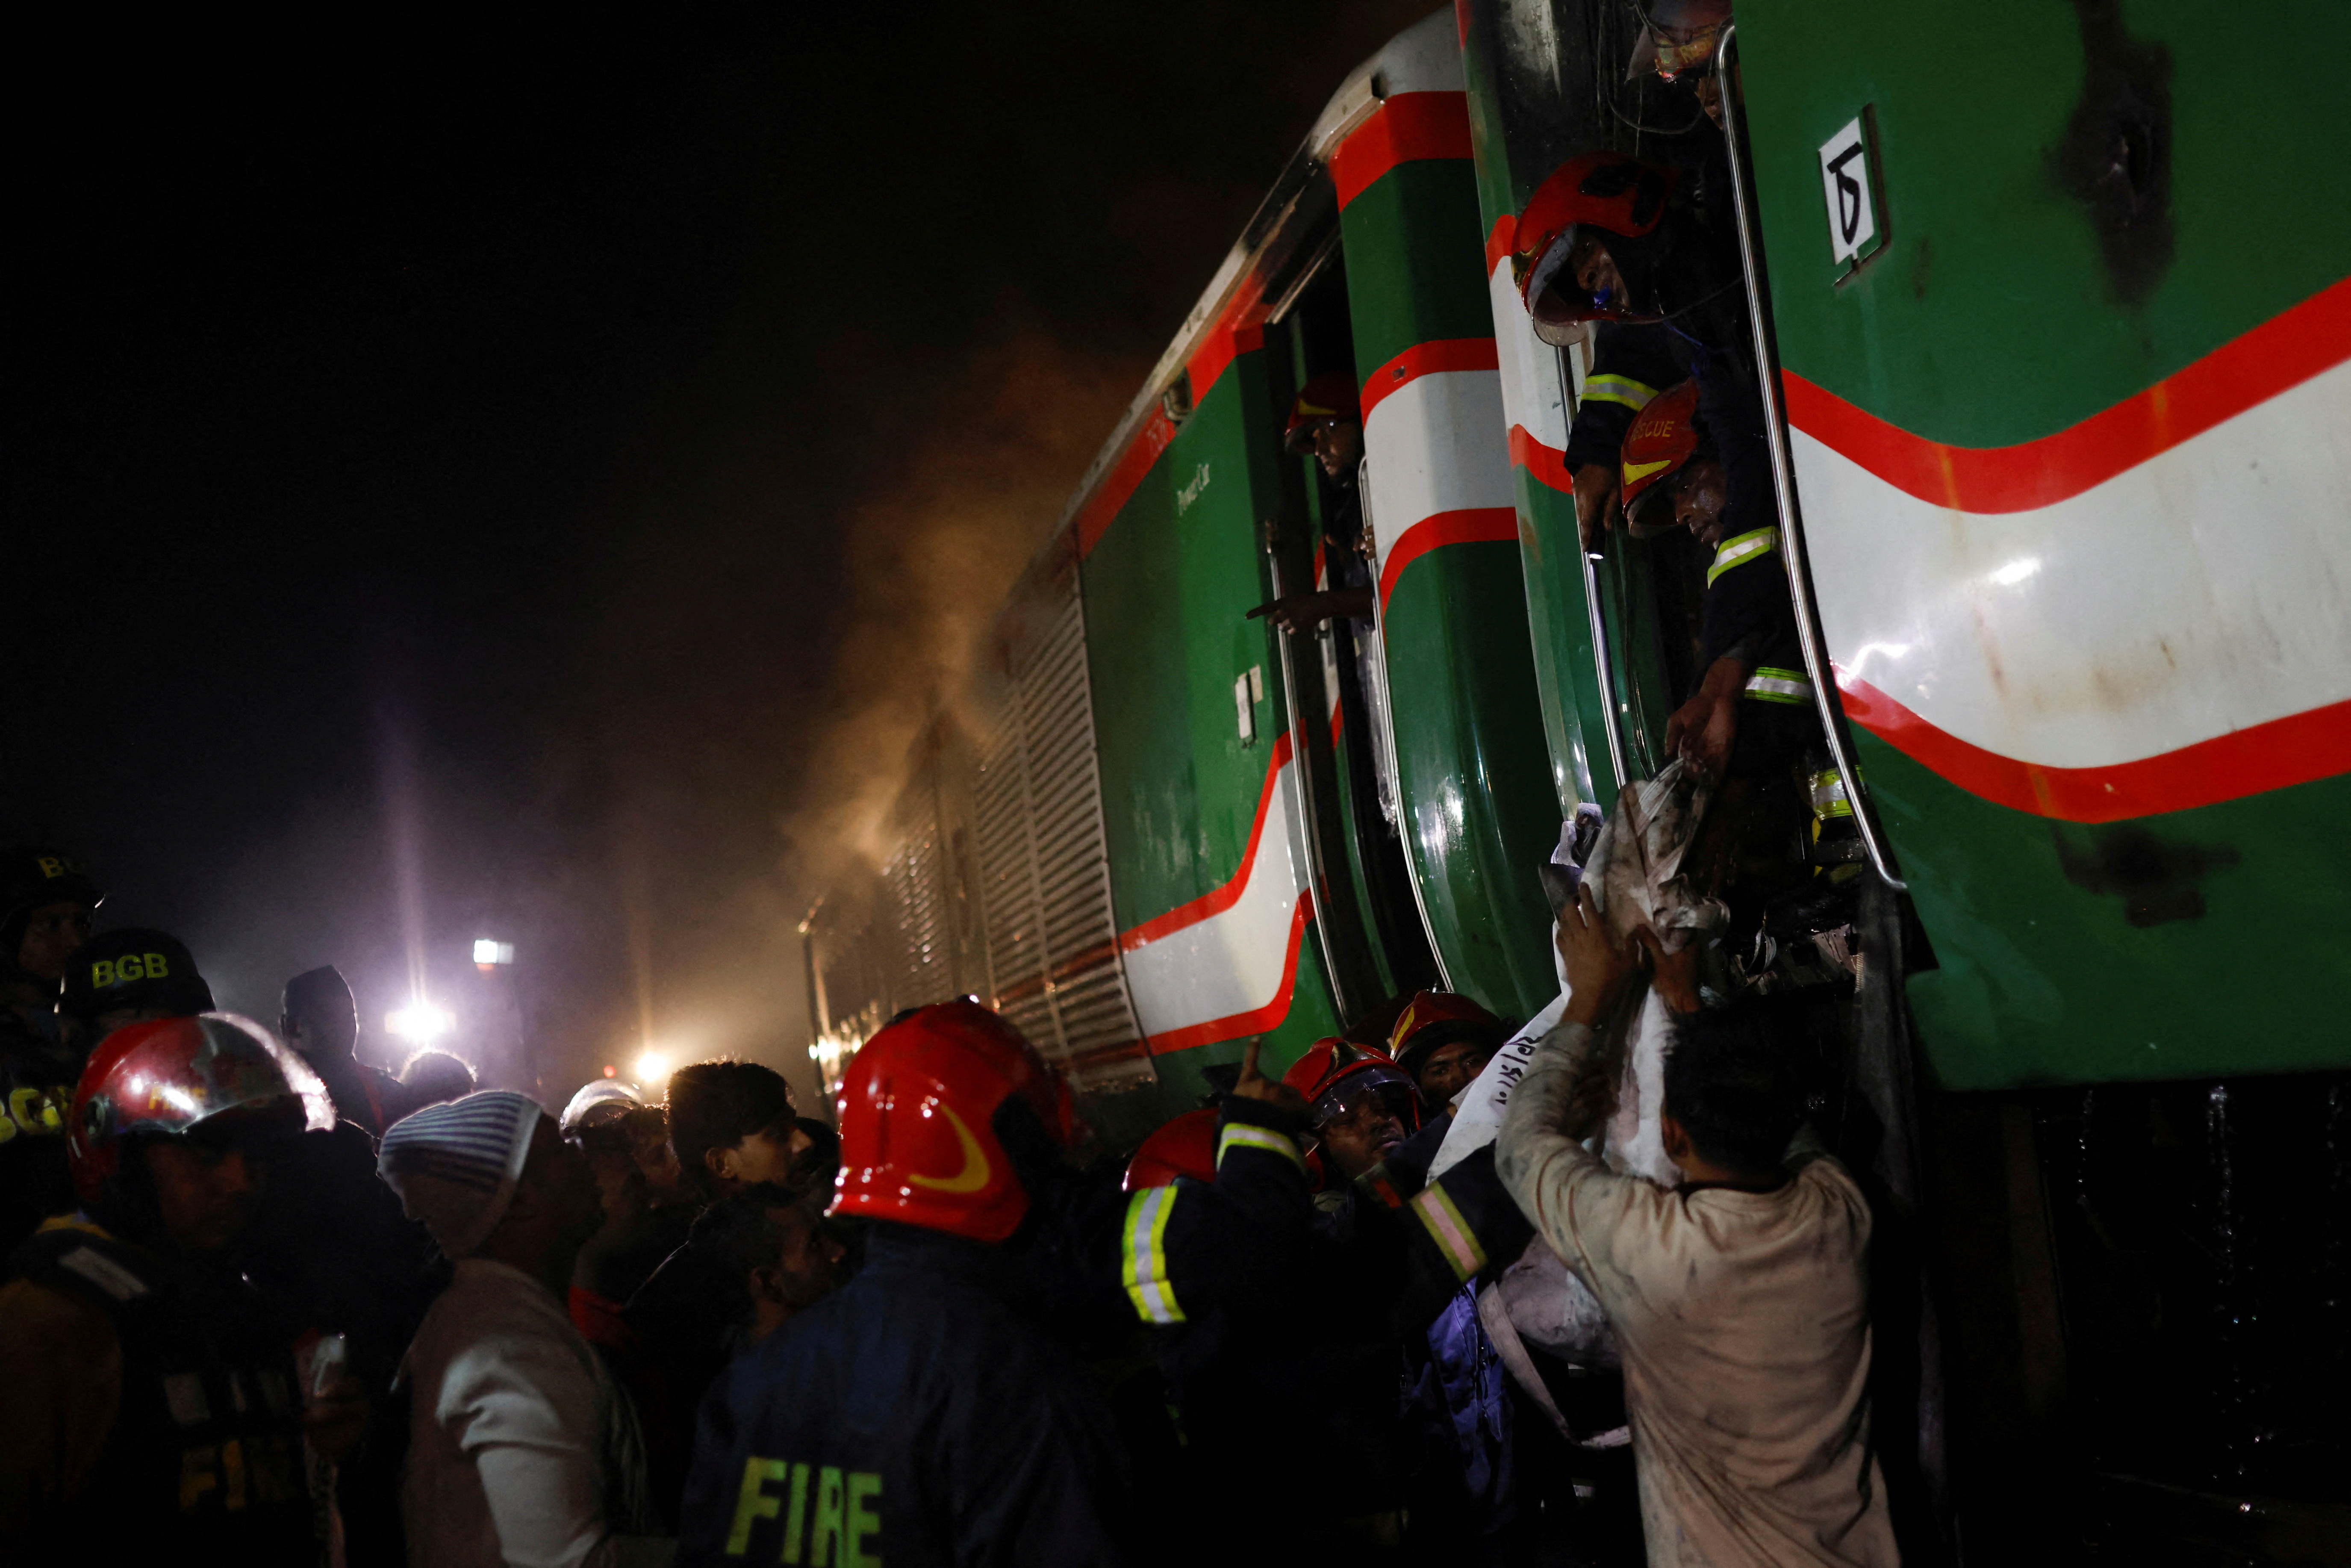 A passenger train caught on fire ahead of the general election in Dhaka